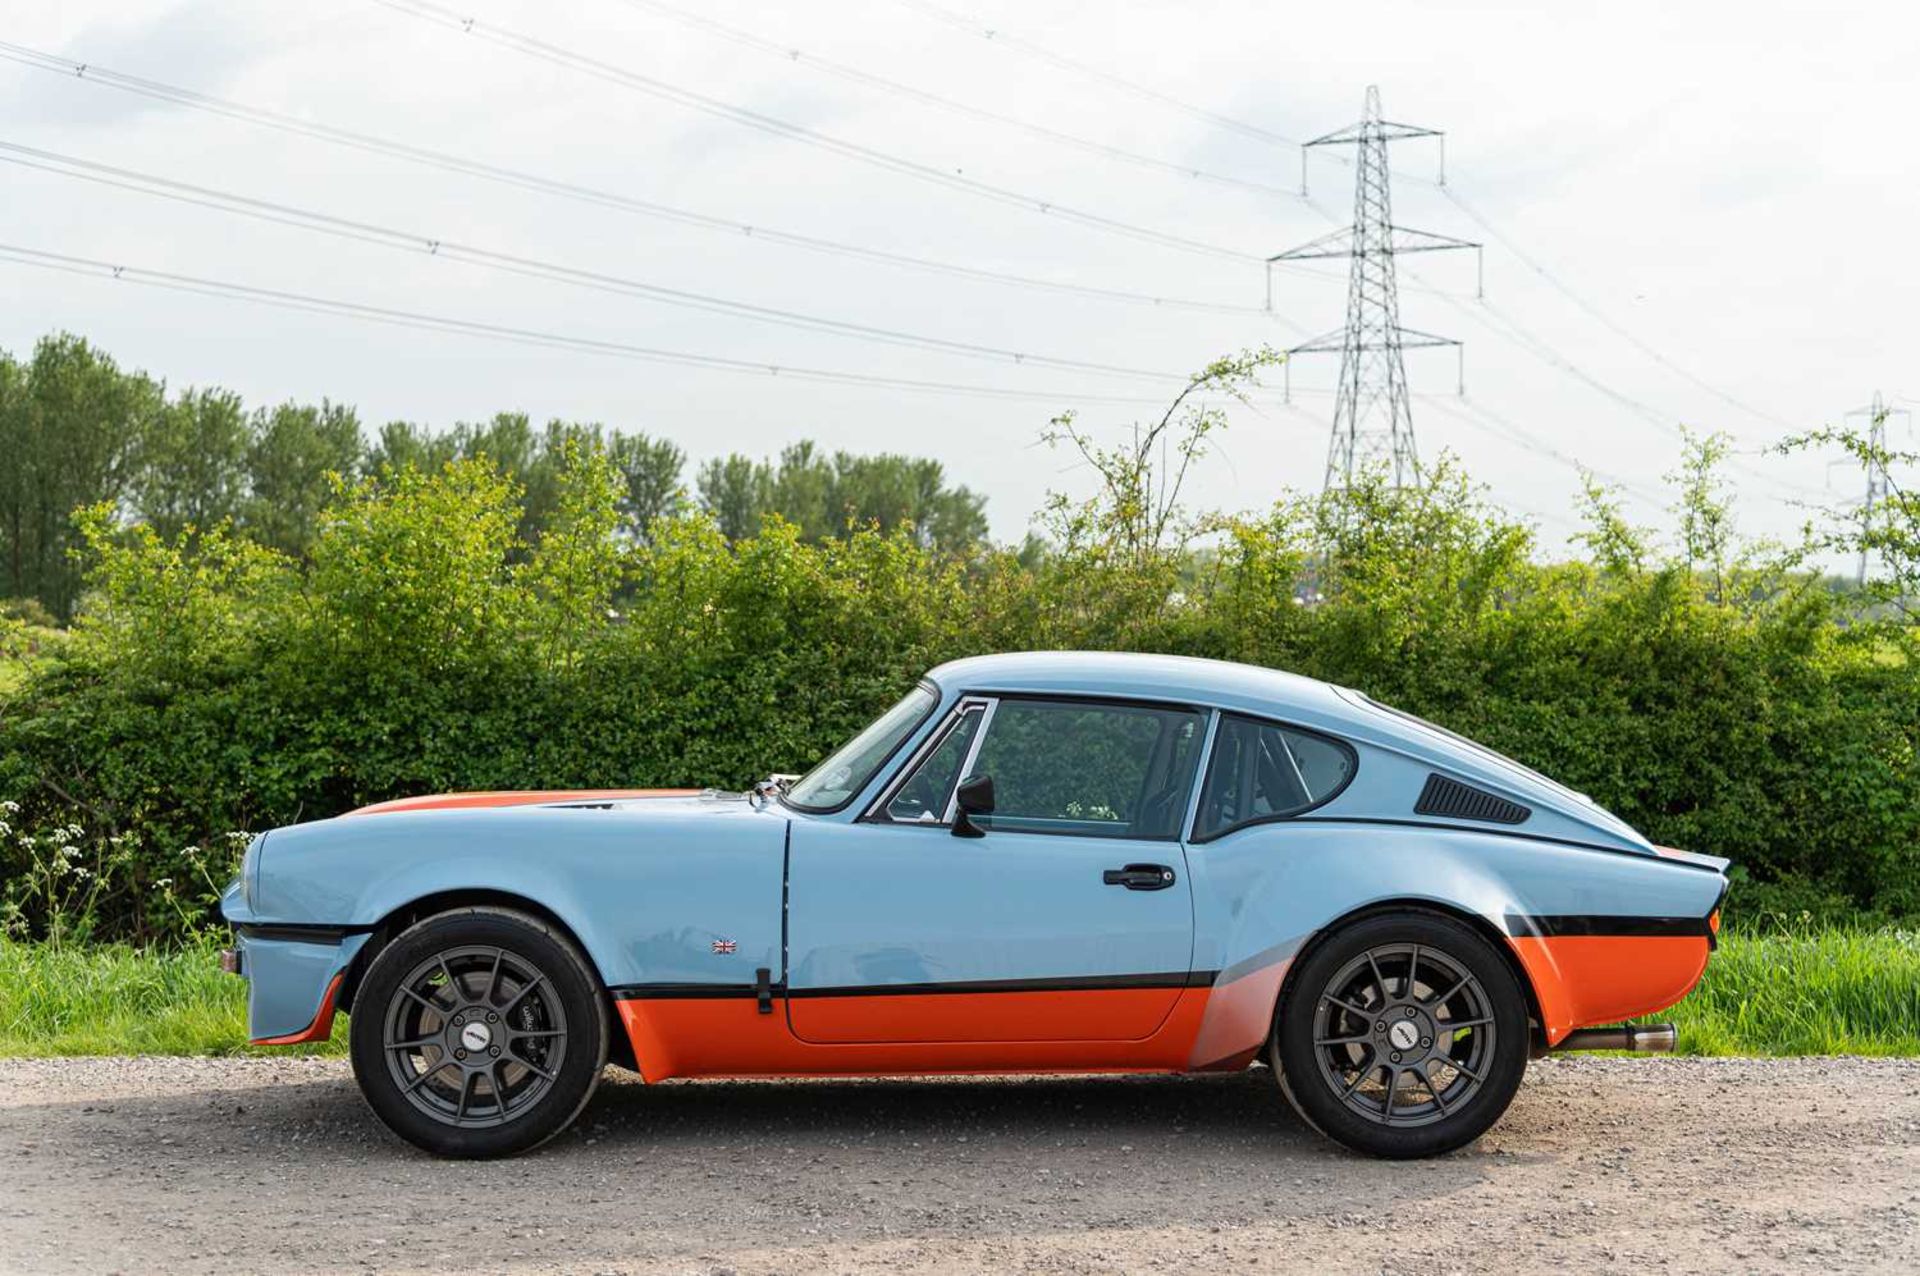 1973 Triumph GT6  ***NO RESERVE*** Presented in Gulf Racing-inspired paintwork, road-going track wea - Image 8 of 65